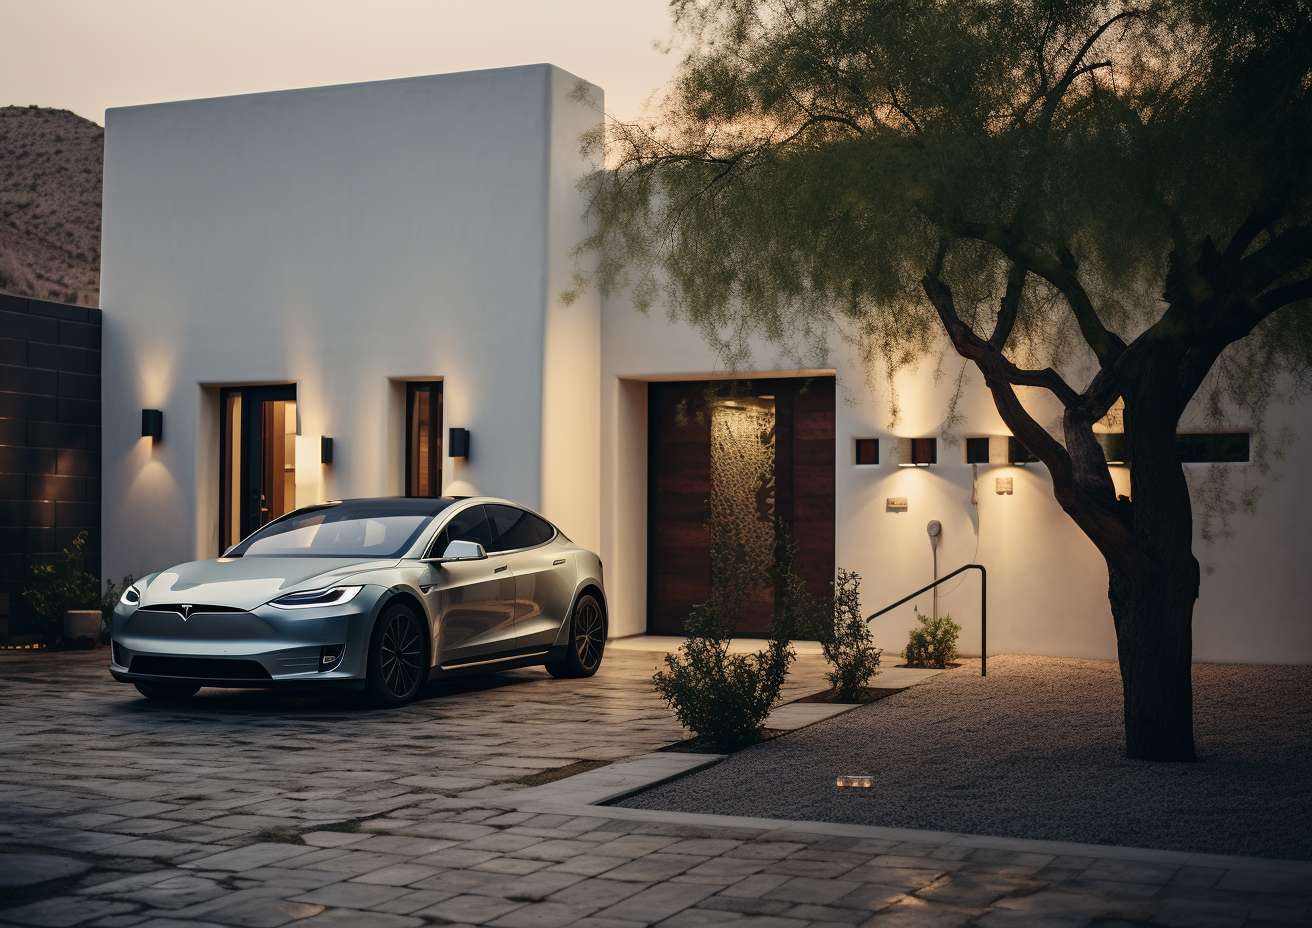 A Tesla Model X parked in front of a house at dusk, with an EV charger installation in Phoenix, AZ.